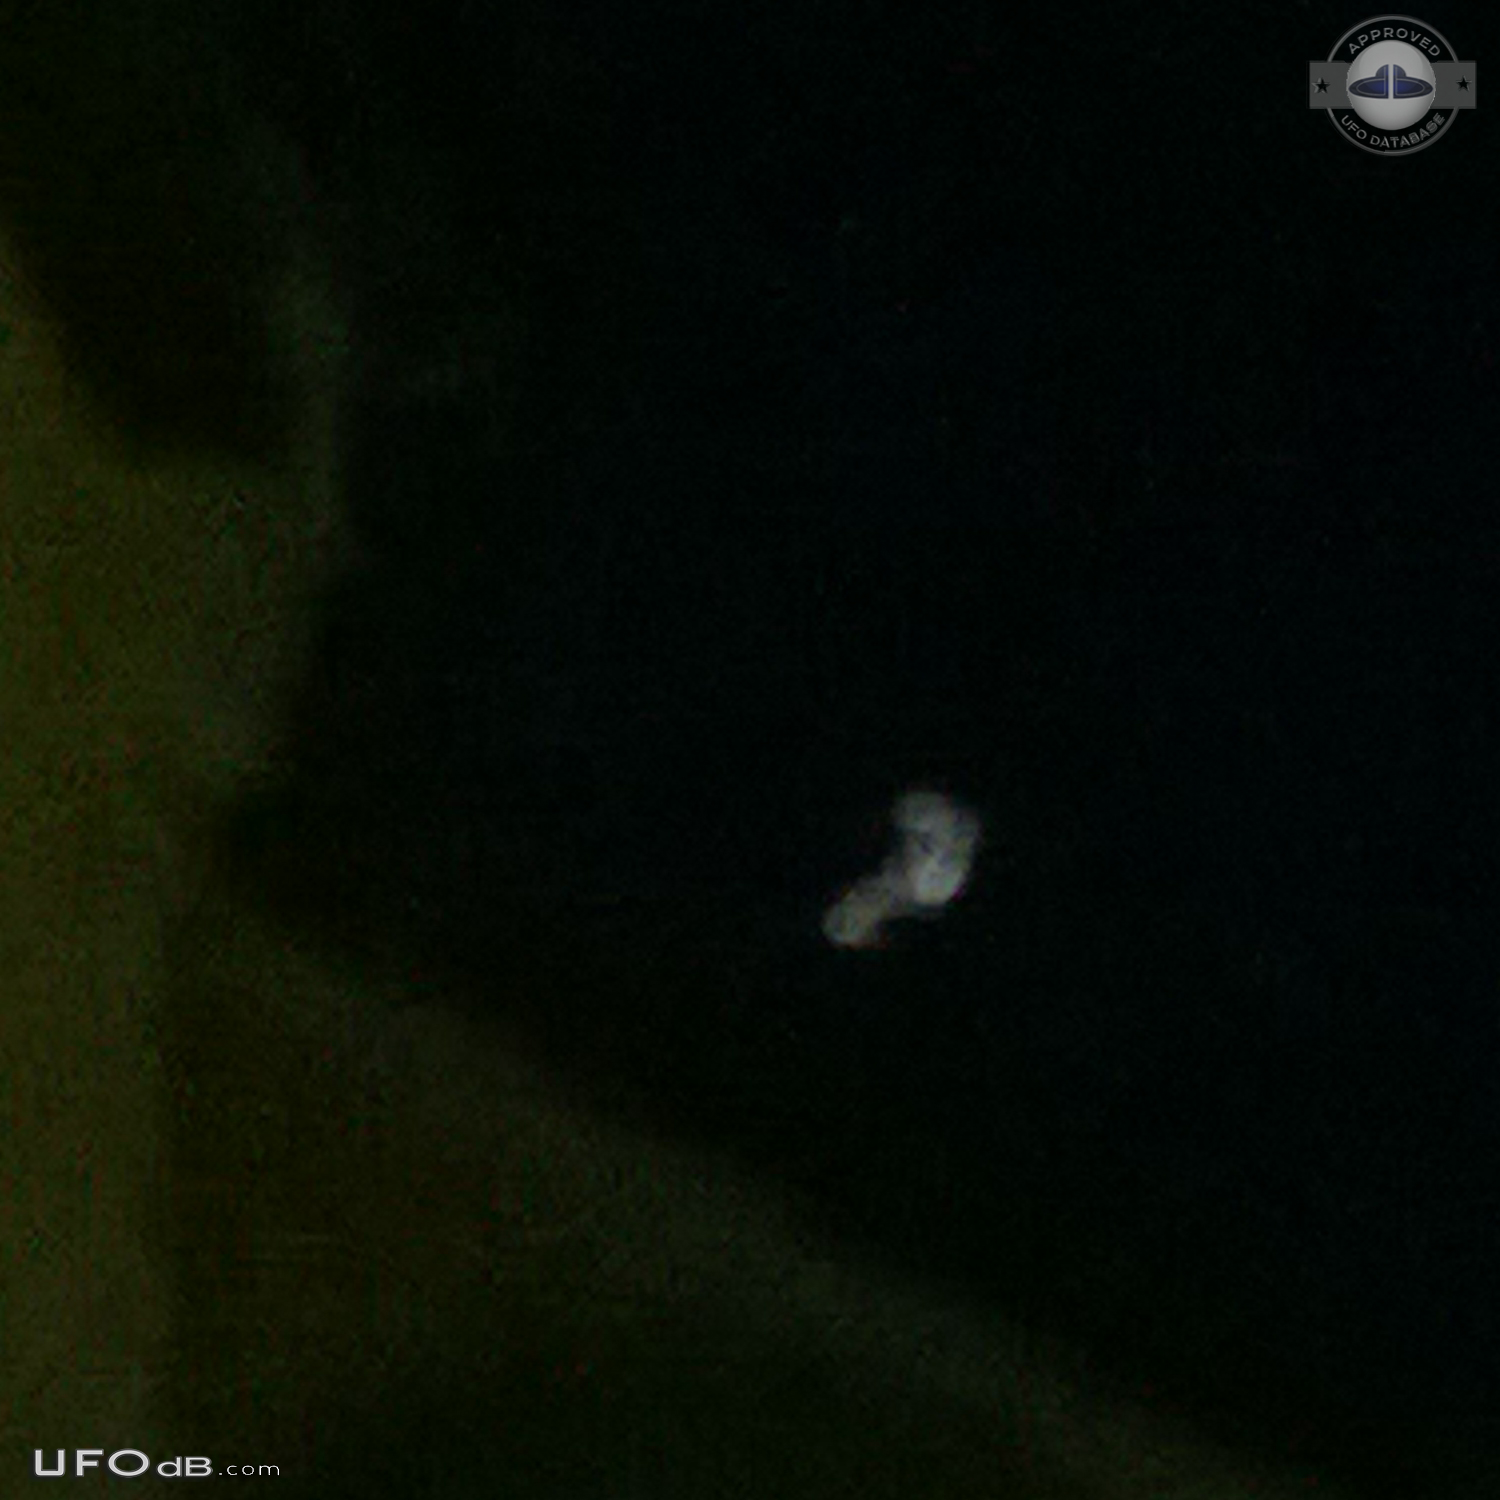 First looked like a larger star then started moving across the sky sil UFO Picture #722-2